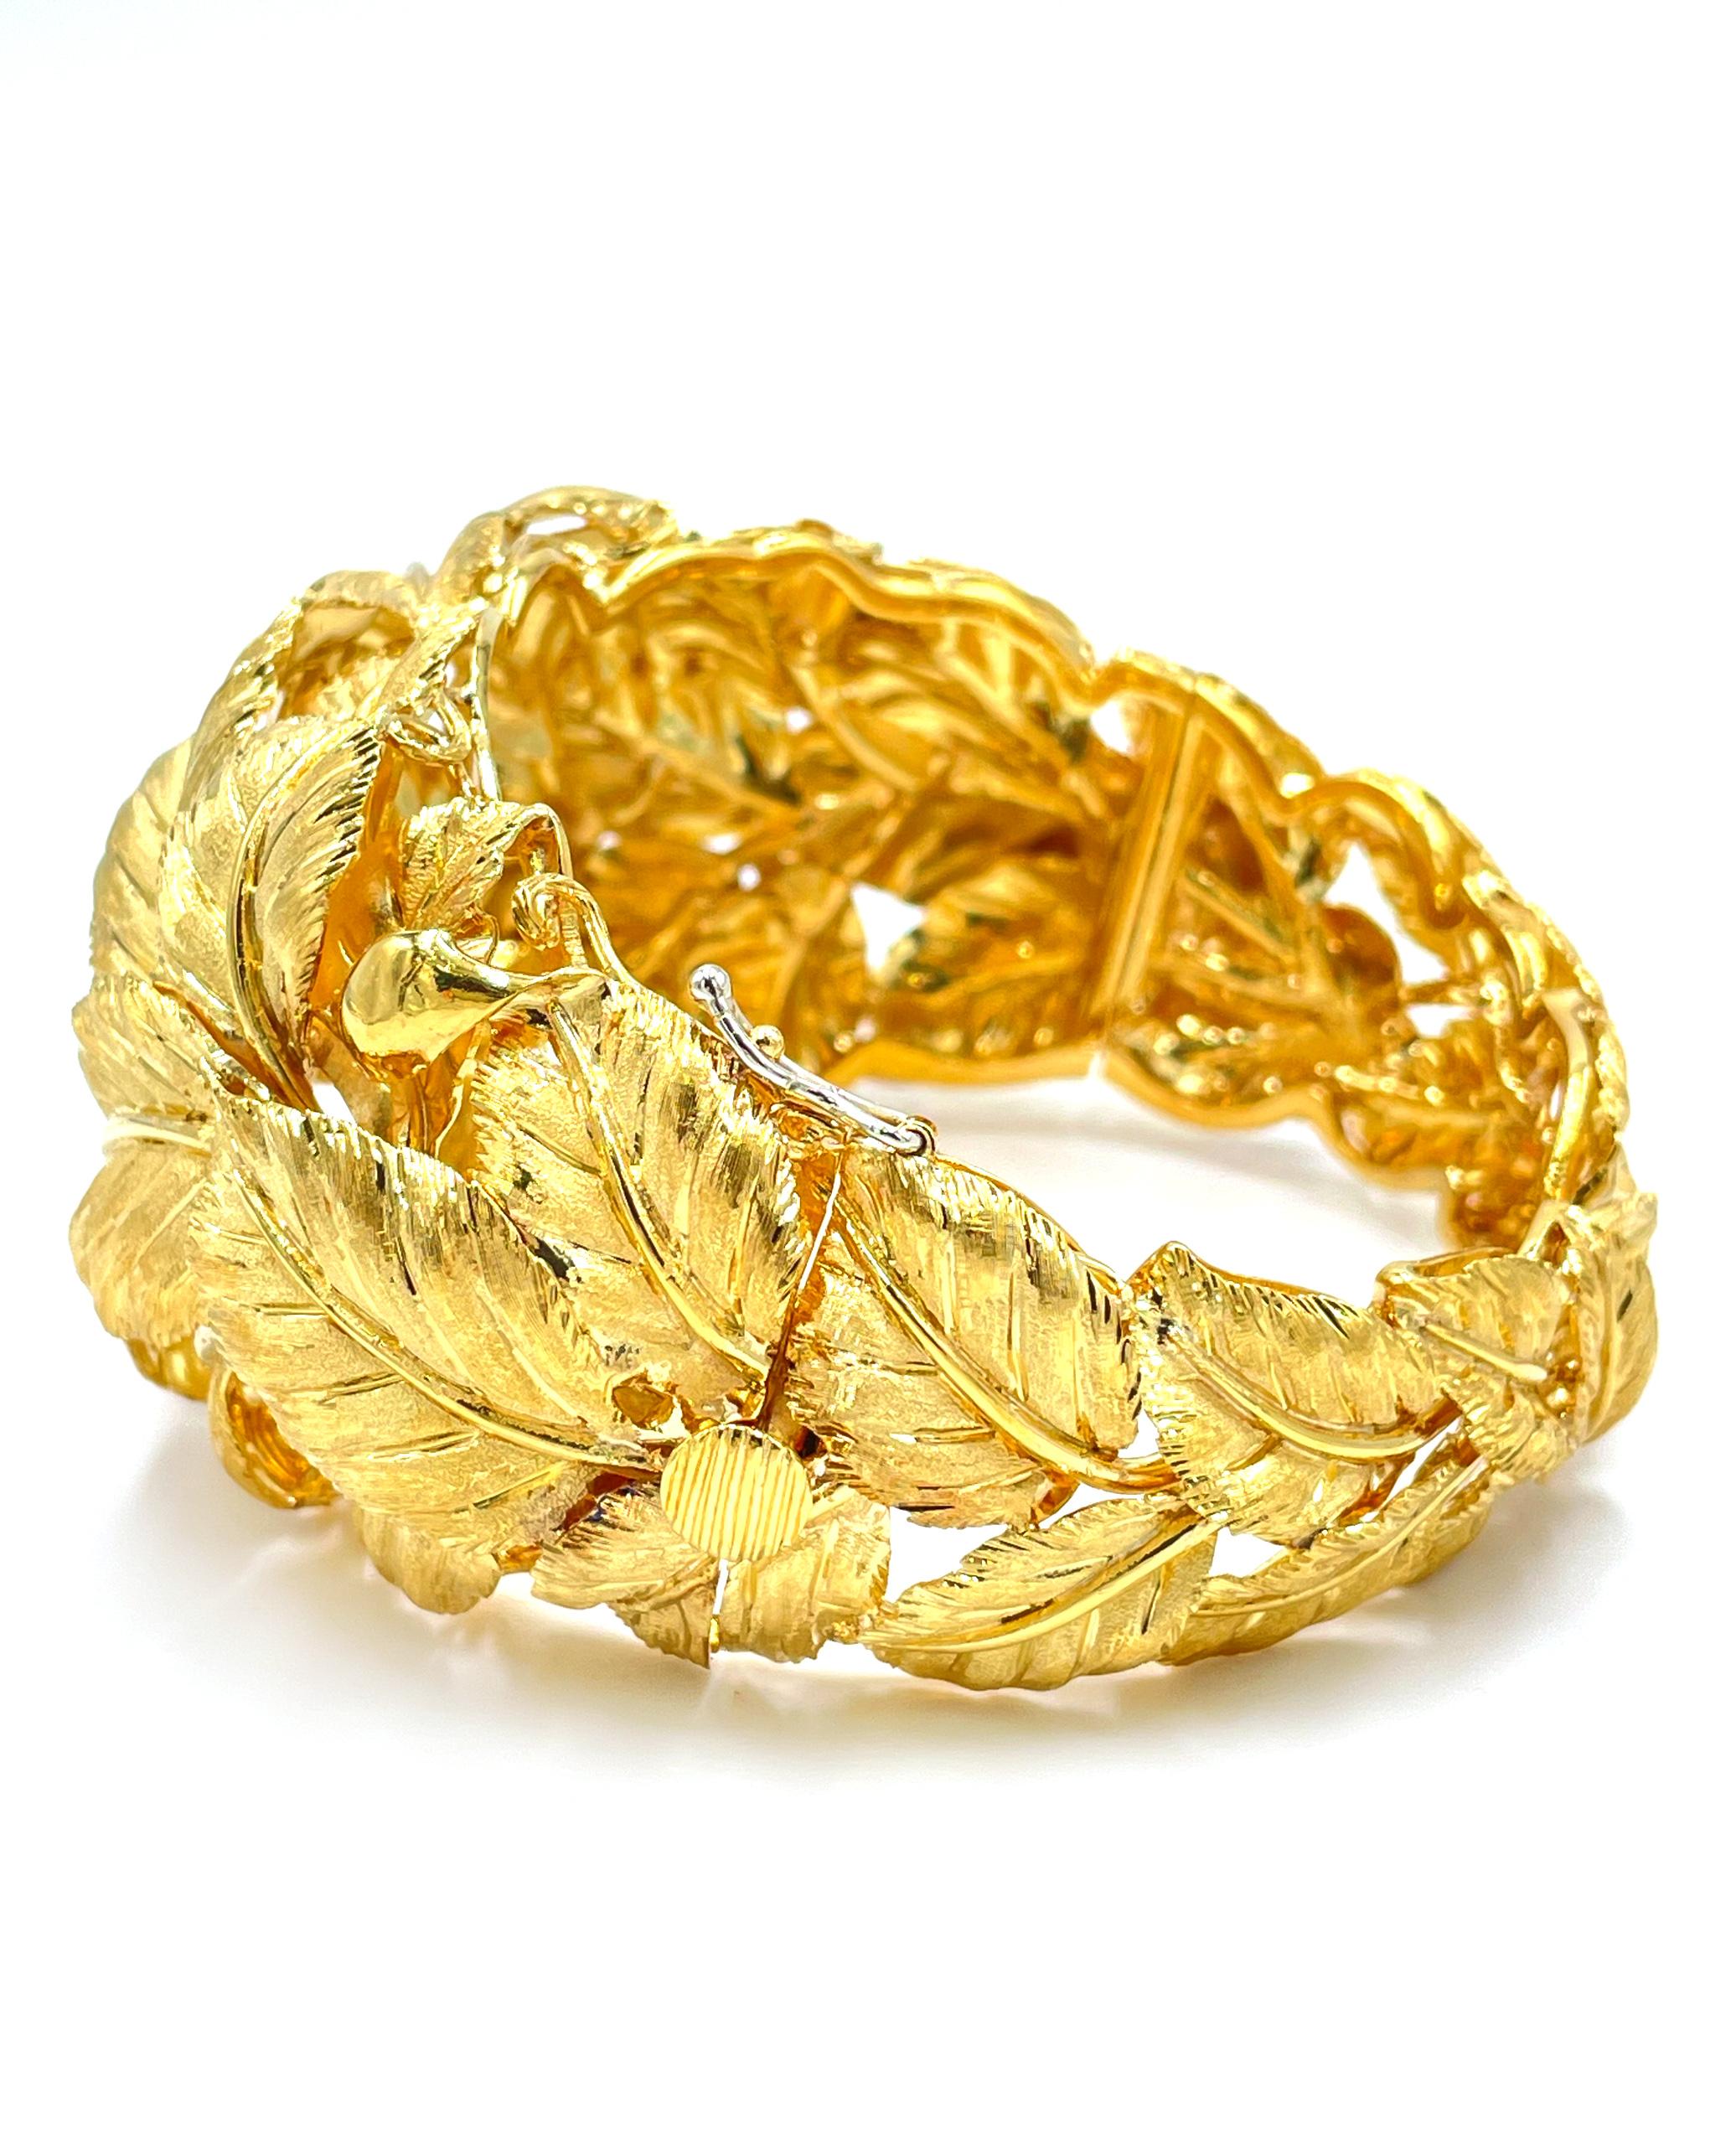 Preowned Vintage 18K Yellow Gold Italian Leaf Wide Statement Bracelet For Sale 1